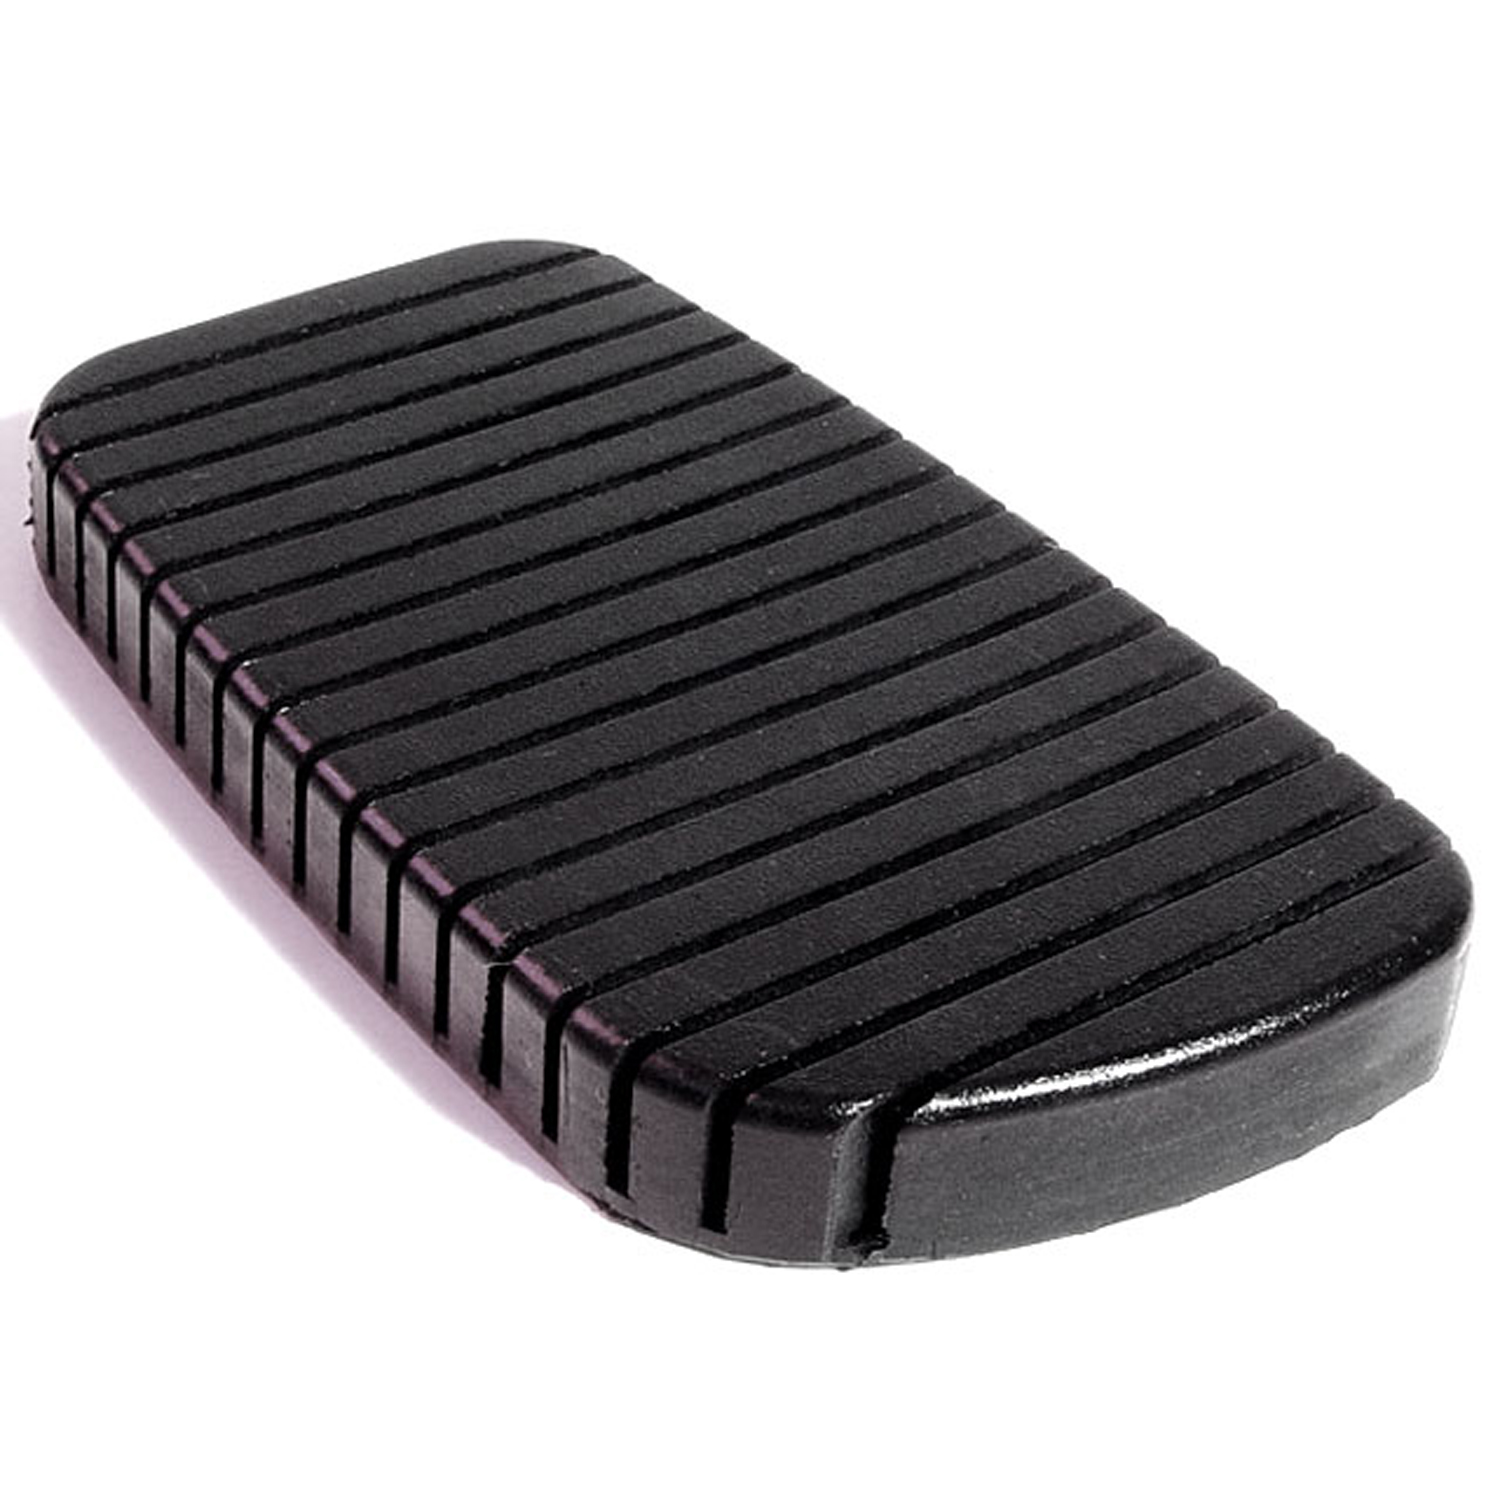 1955 Mercury Monterey Brake Pedal Pad.  Correct reproduction of a difficult part-CB 90-C